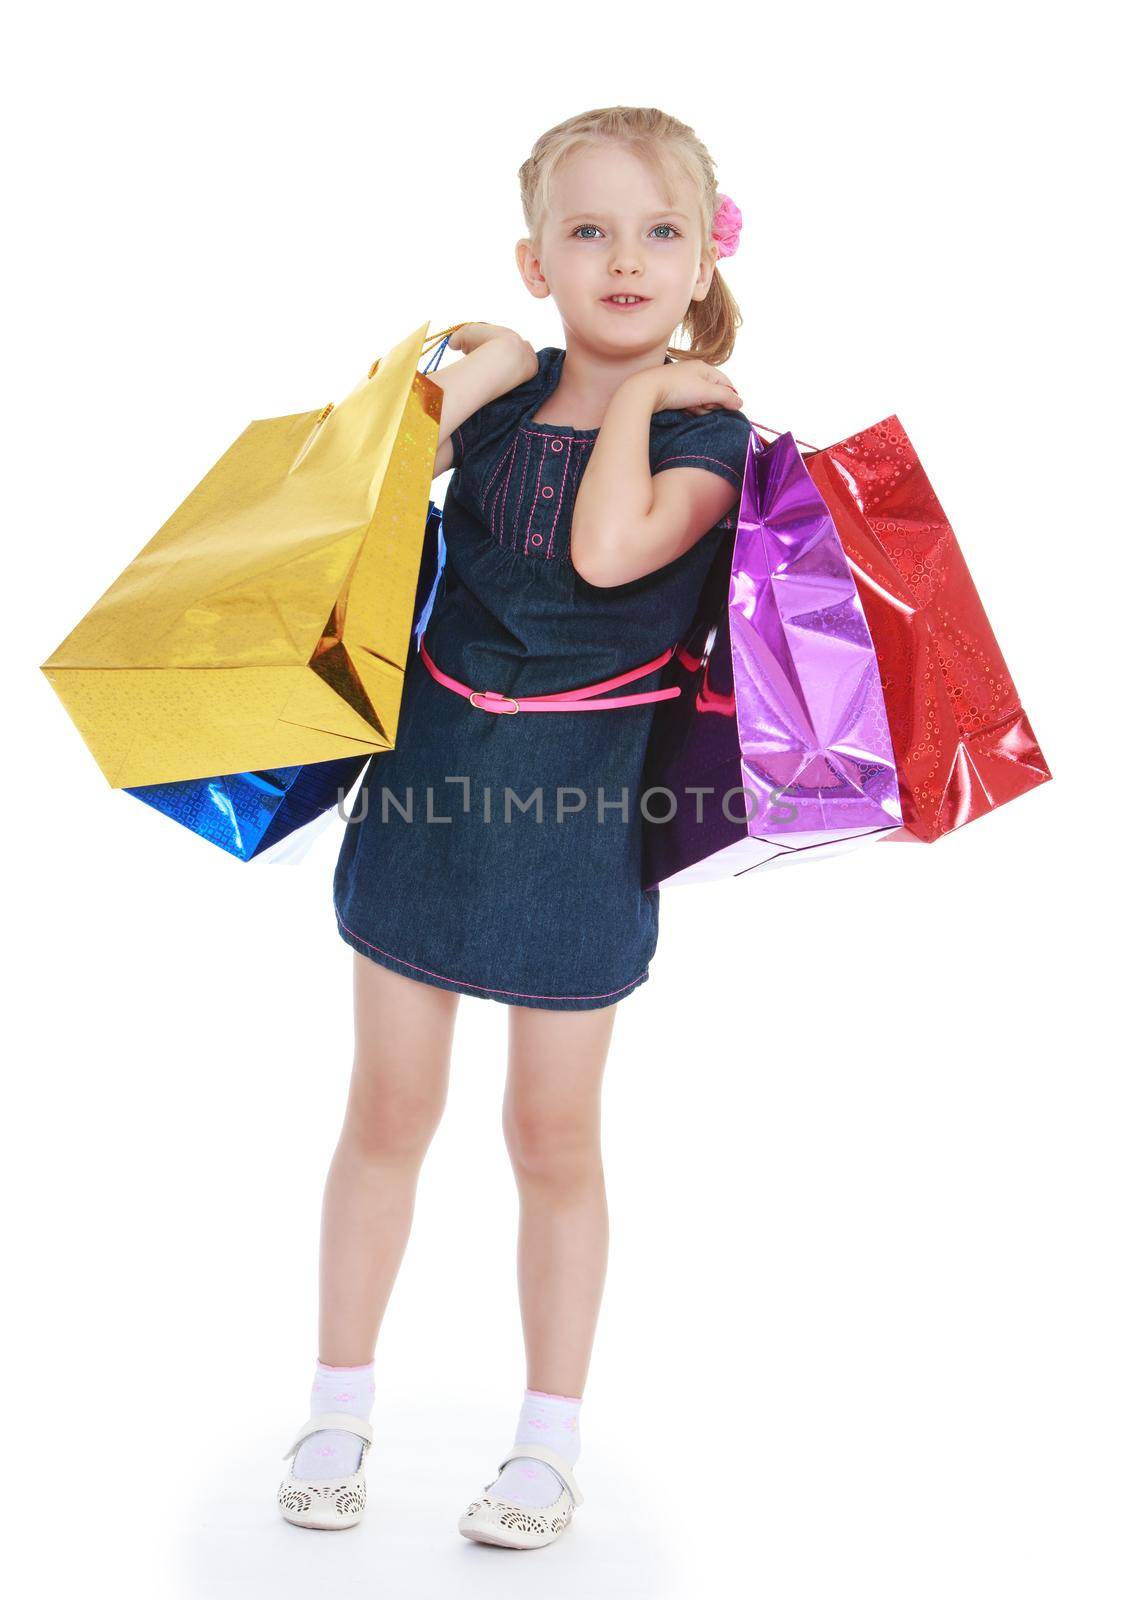 Little girl packages in hands. Isolated on white background .